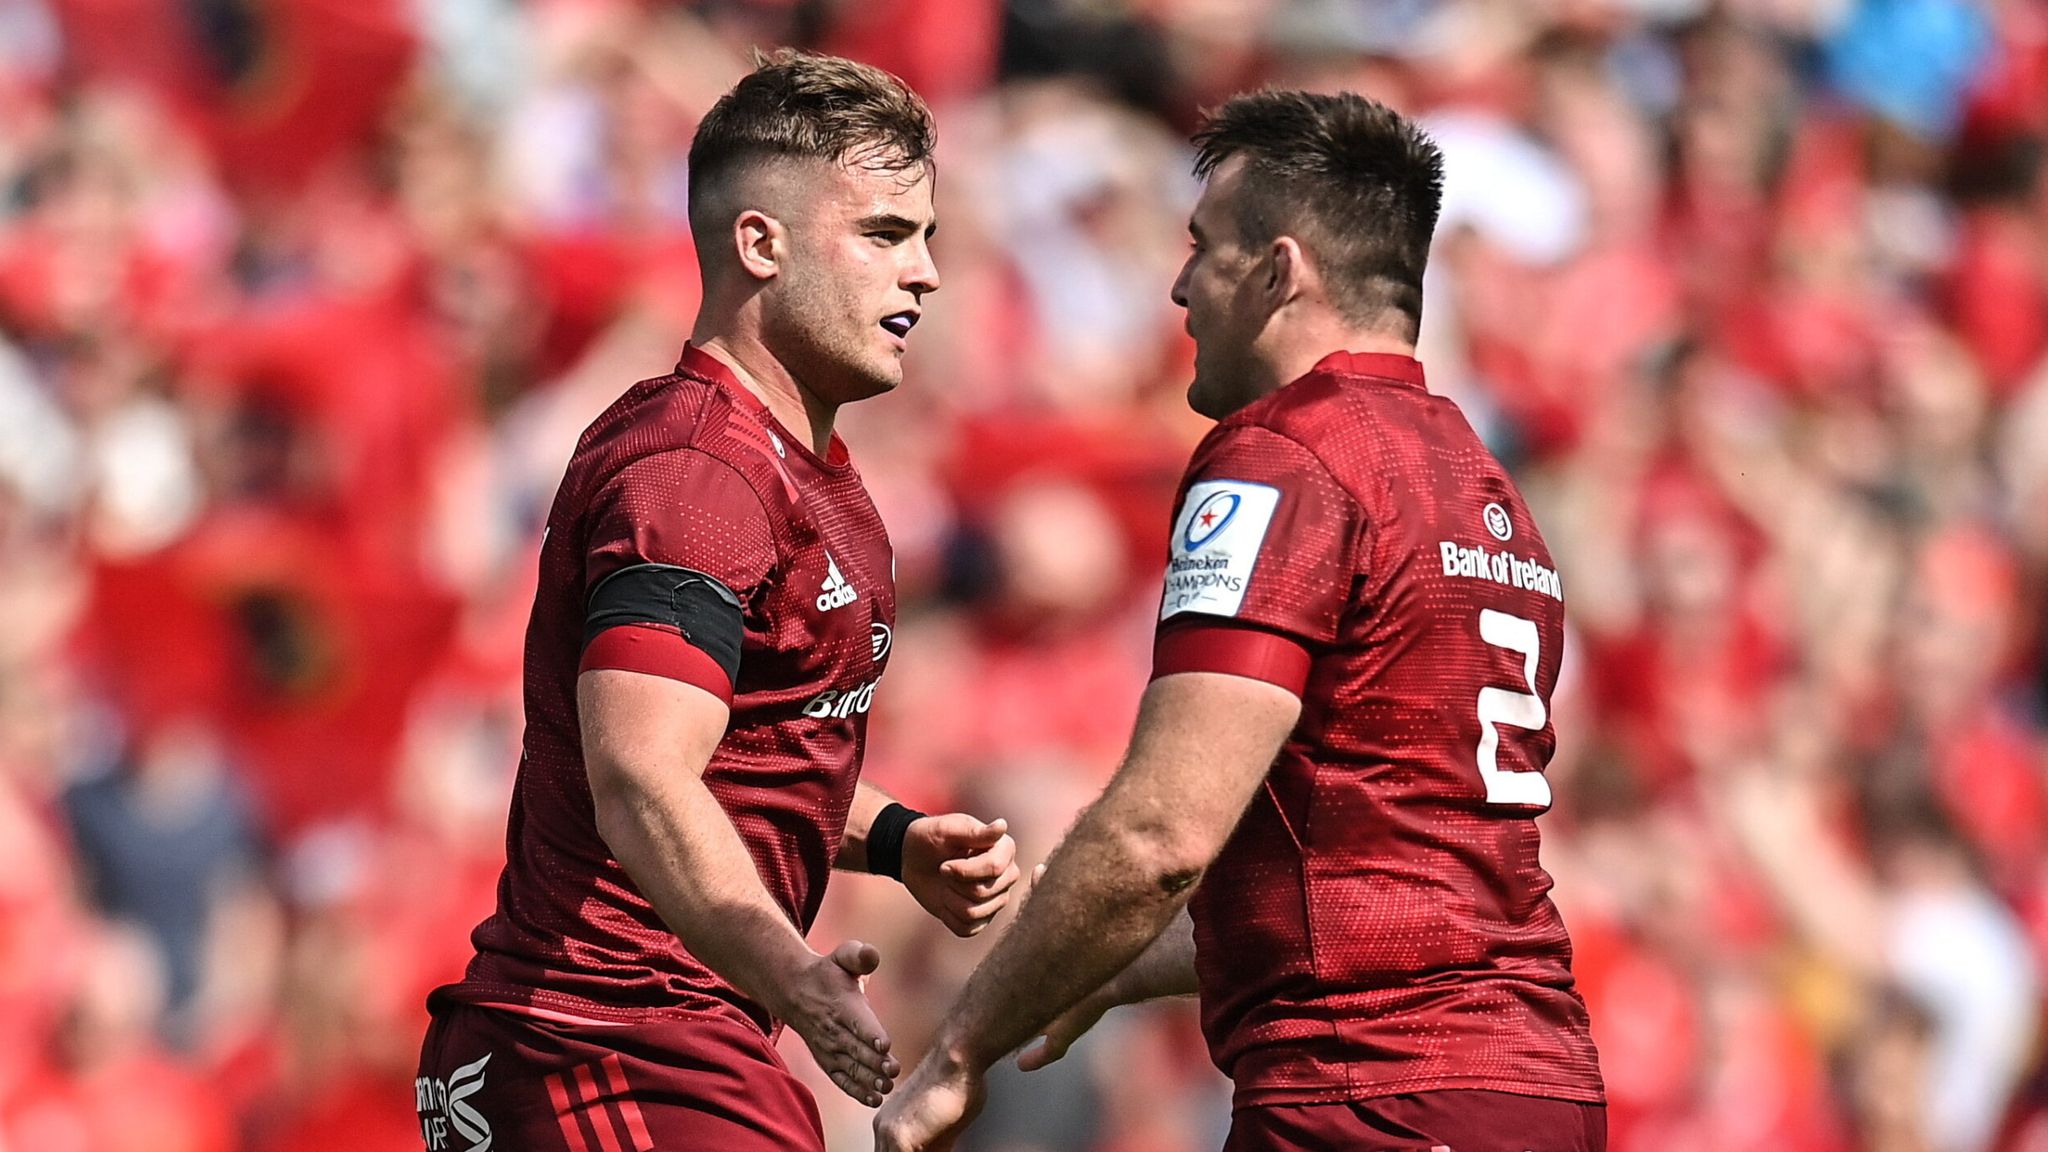 Munster 24-24 Toulouse (AET) Defending champions win dramatic European Cup quarter-final on penalty shootout Rugby Union News Sky Sports